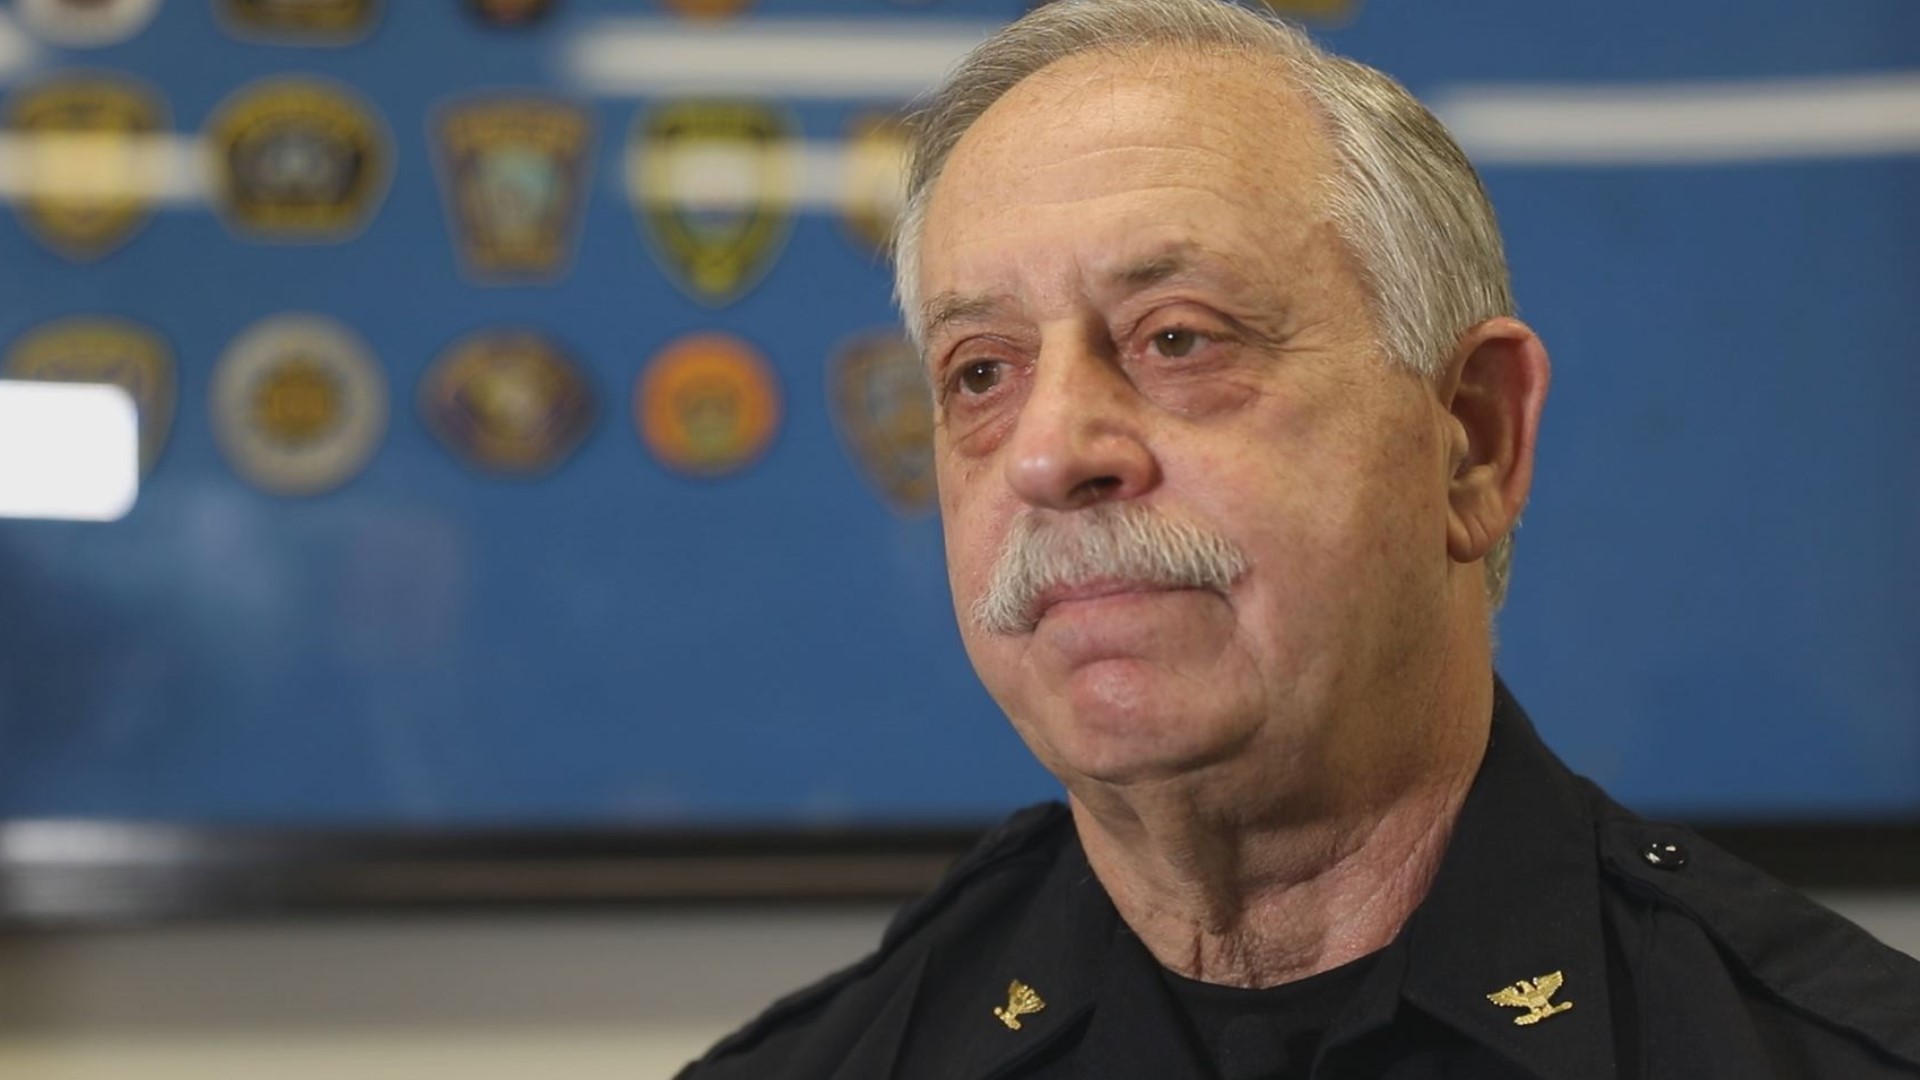 Police Chief Jim Cervera has made it official: he will retire on May 1.